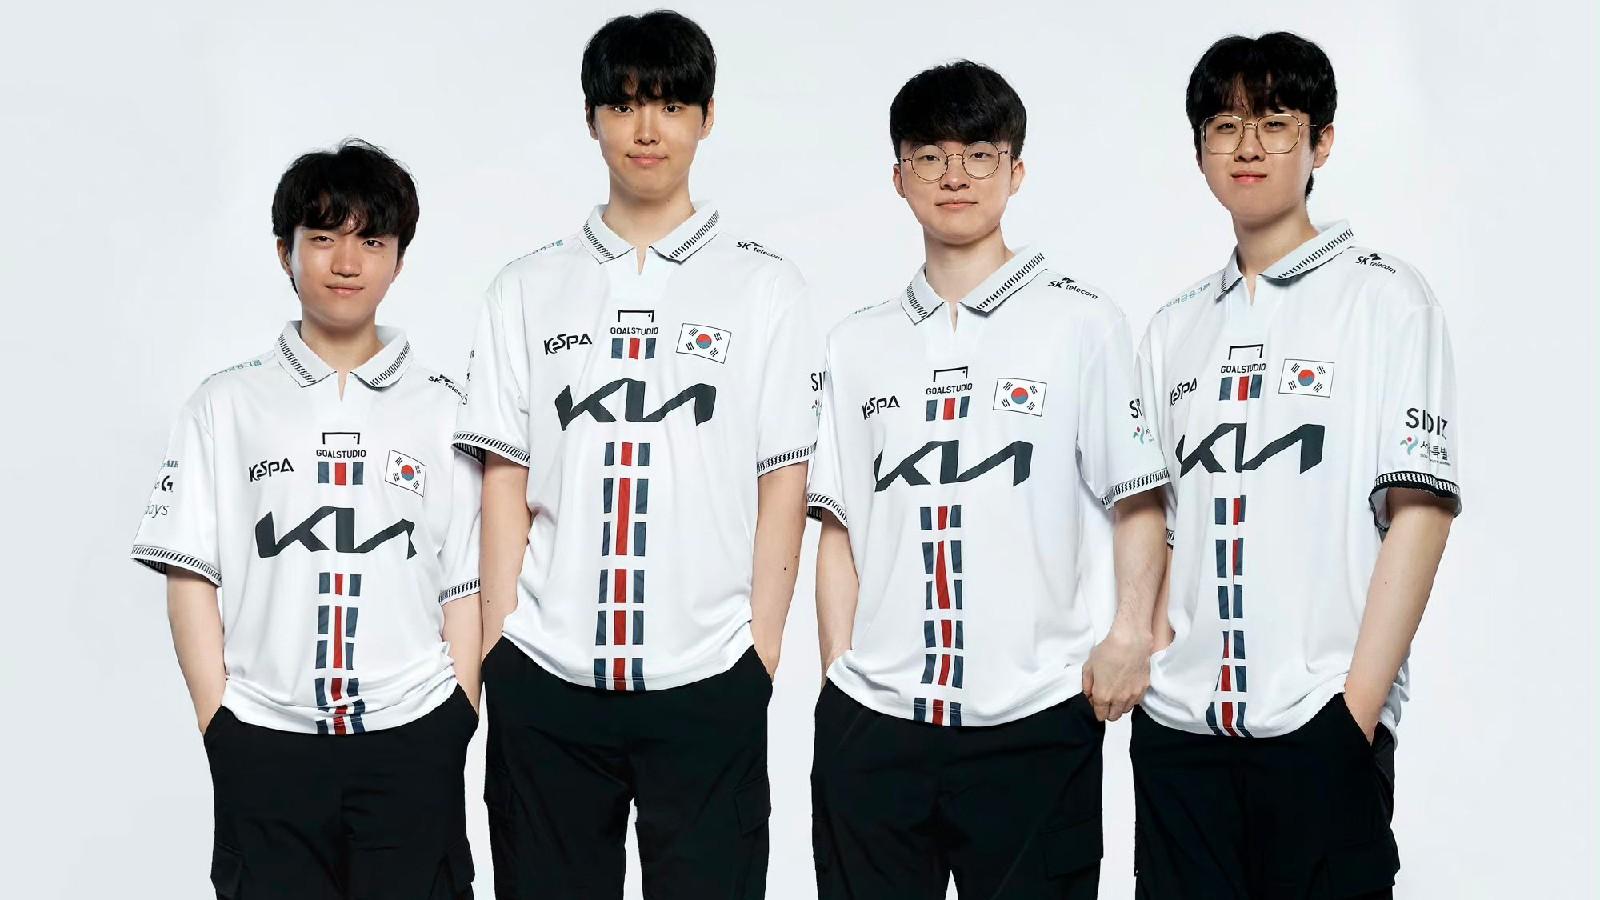 How To Register and Play League Of Legend Korea